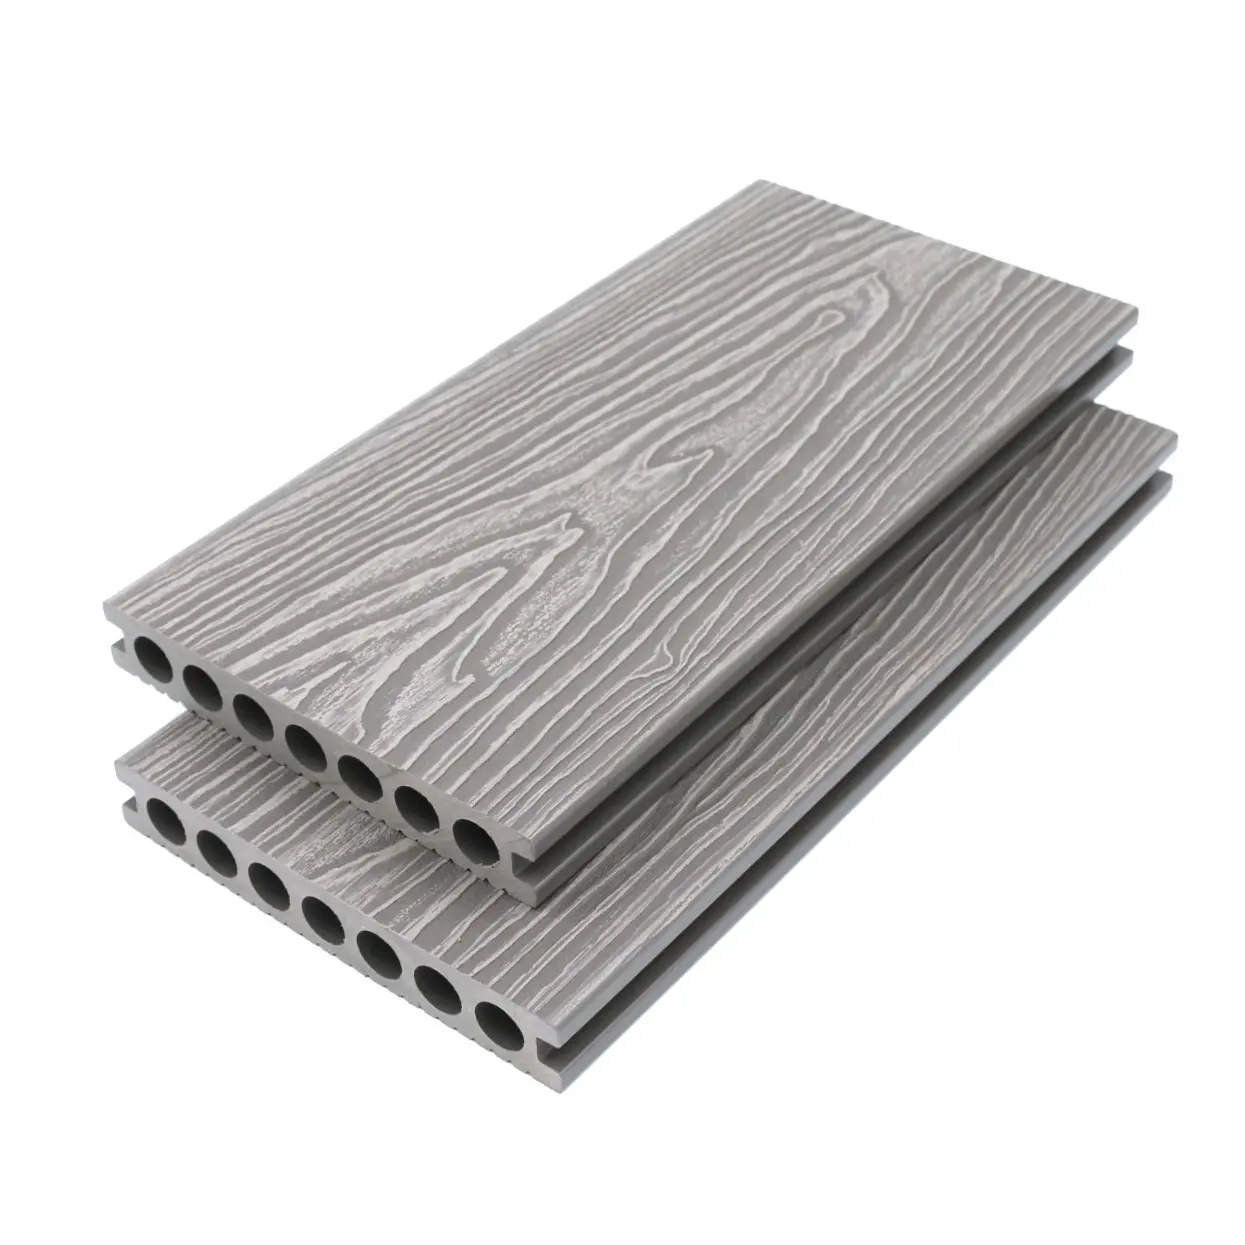 lnaopu composite decking light grey color waterproof and low maintenance for swimming pool outdoor flooring